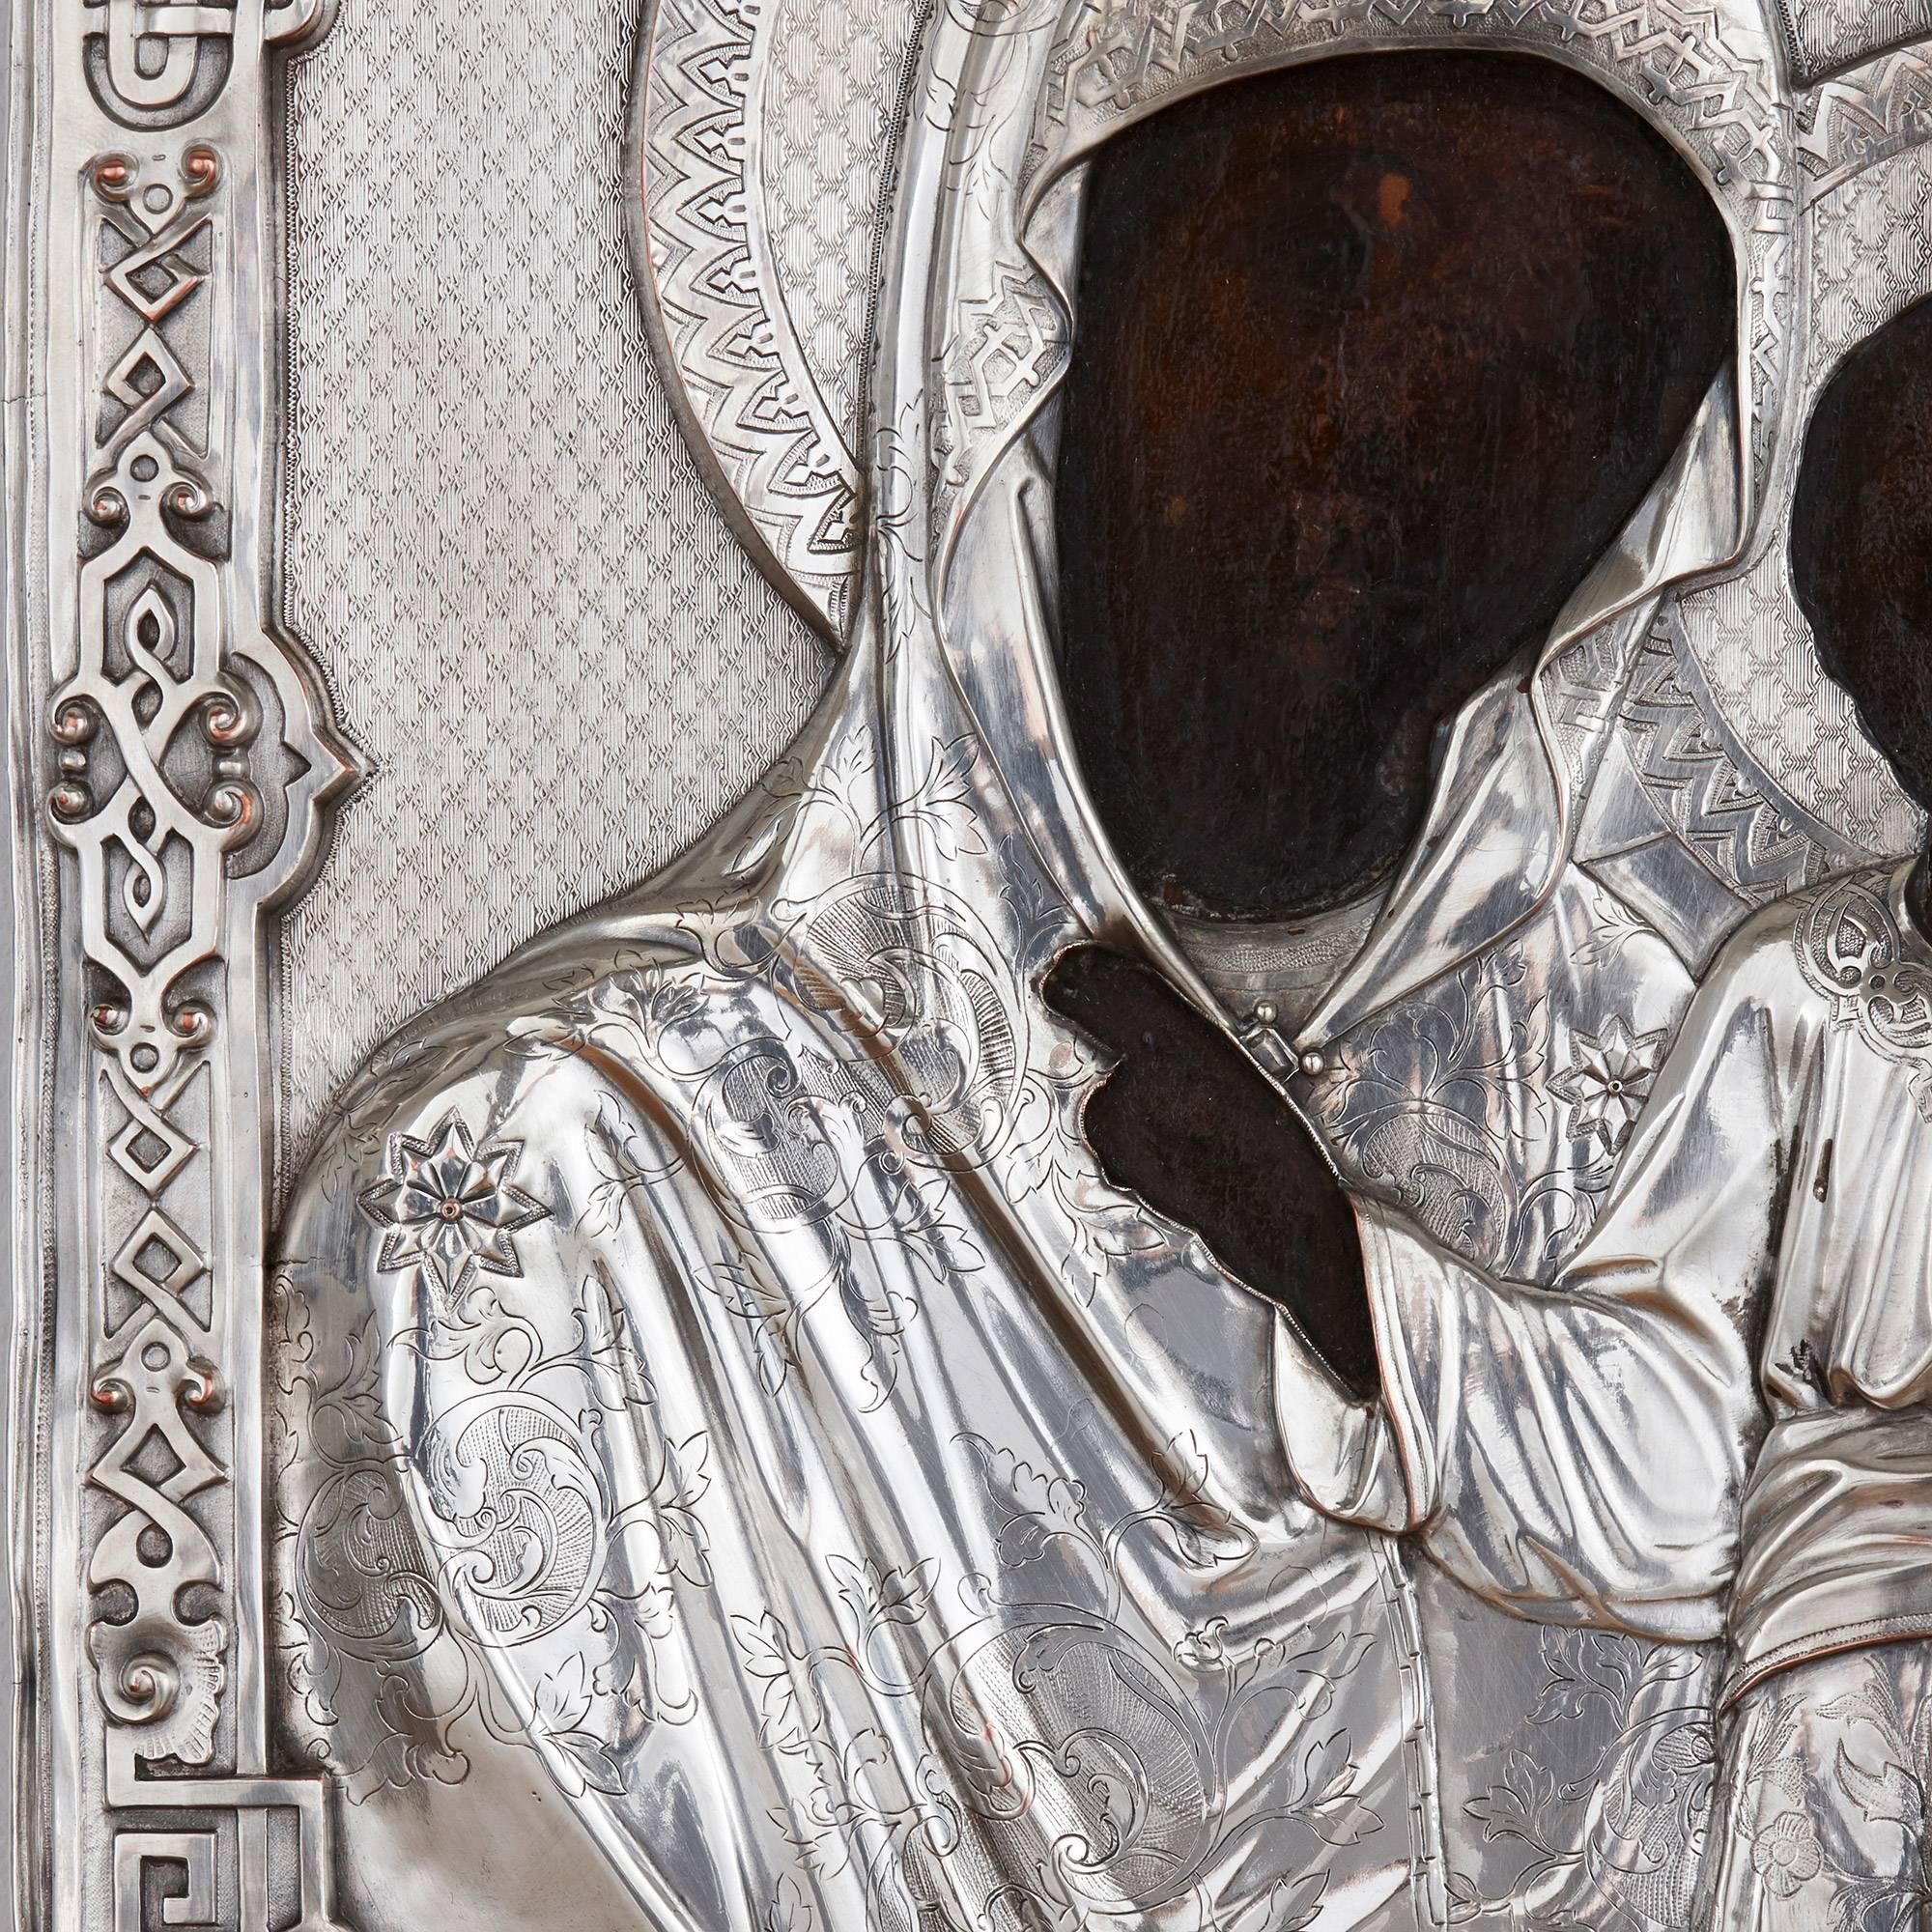 Of rectangular form, the icon depicting the Madonna and Christ Child in typical pose, covered by an embellished silver oklad.

This stunning antique Russian icon, portraying a tender moment of intimacy between the Madonna and Christ, would make a